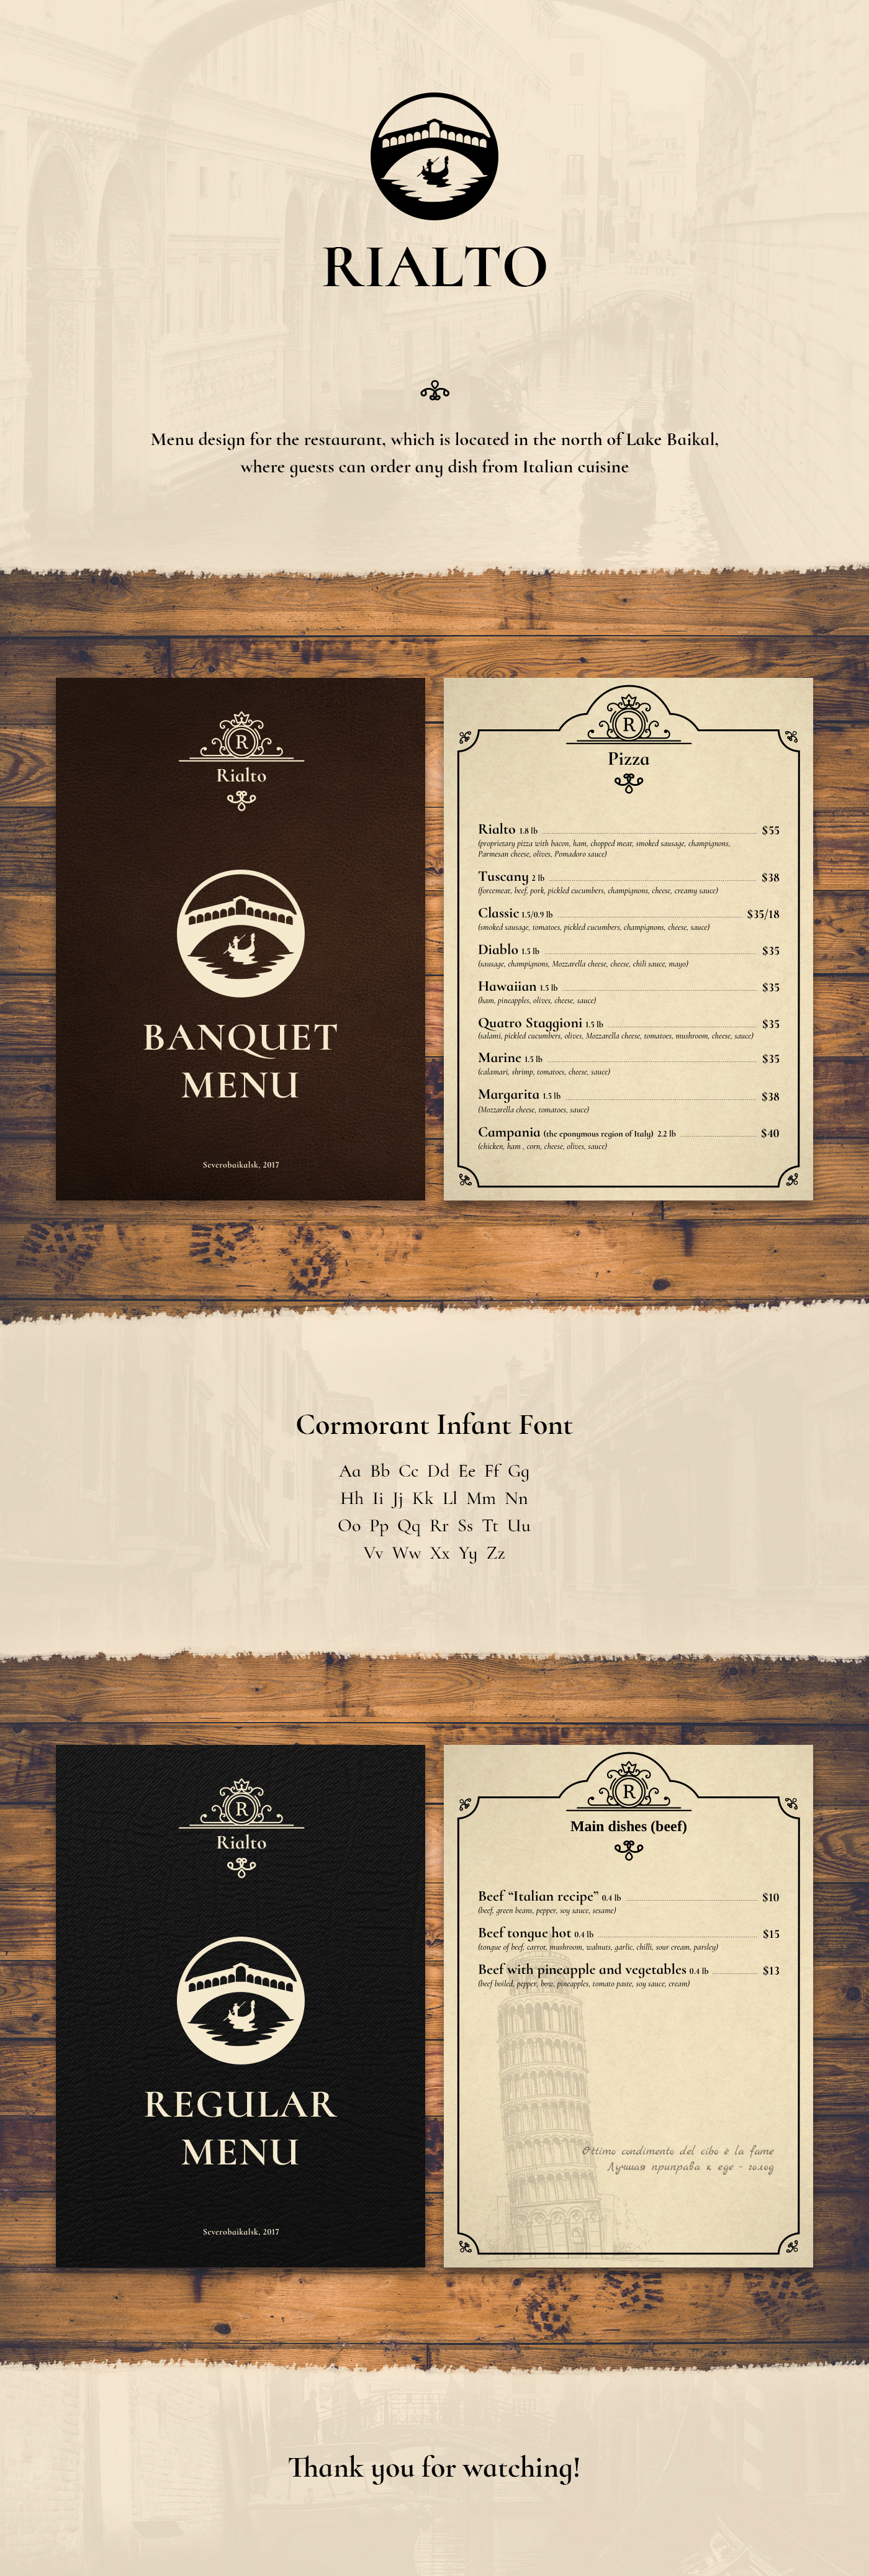 menu design polygraphy graphic design  layouts restaurant cafe Italy